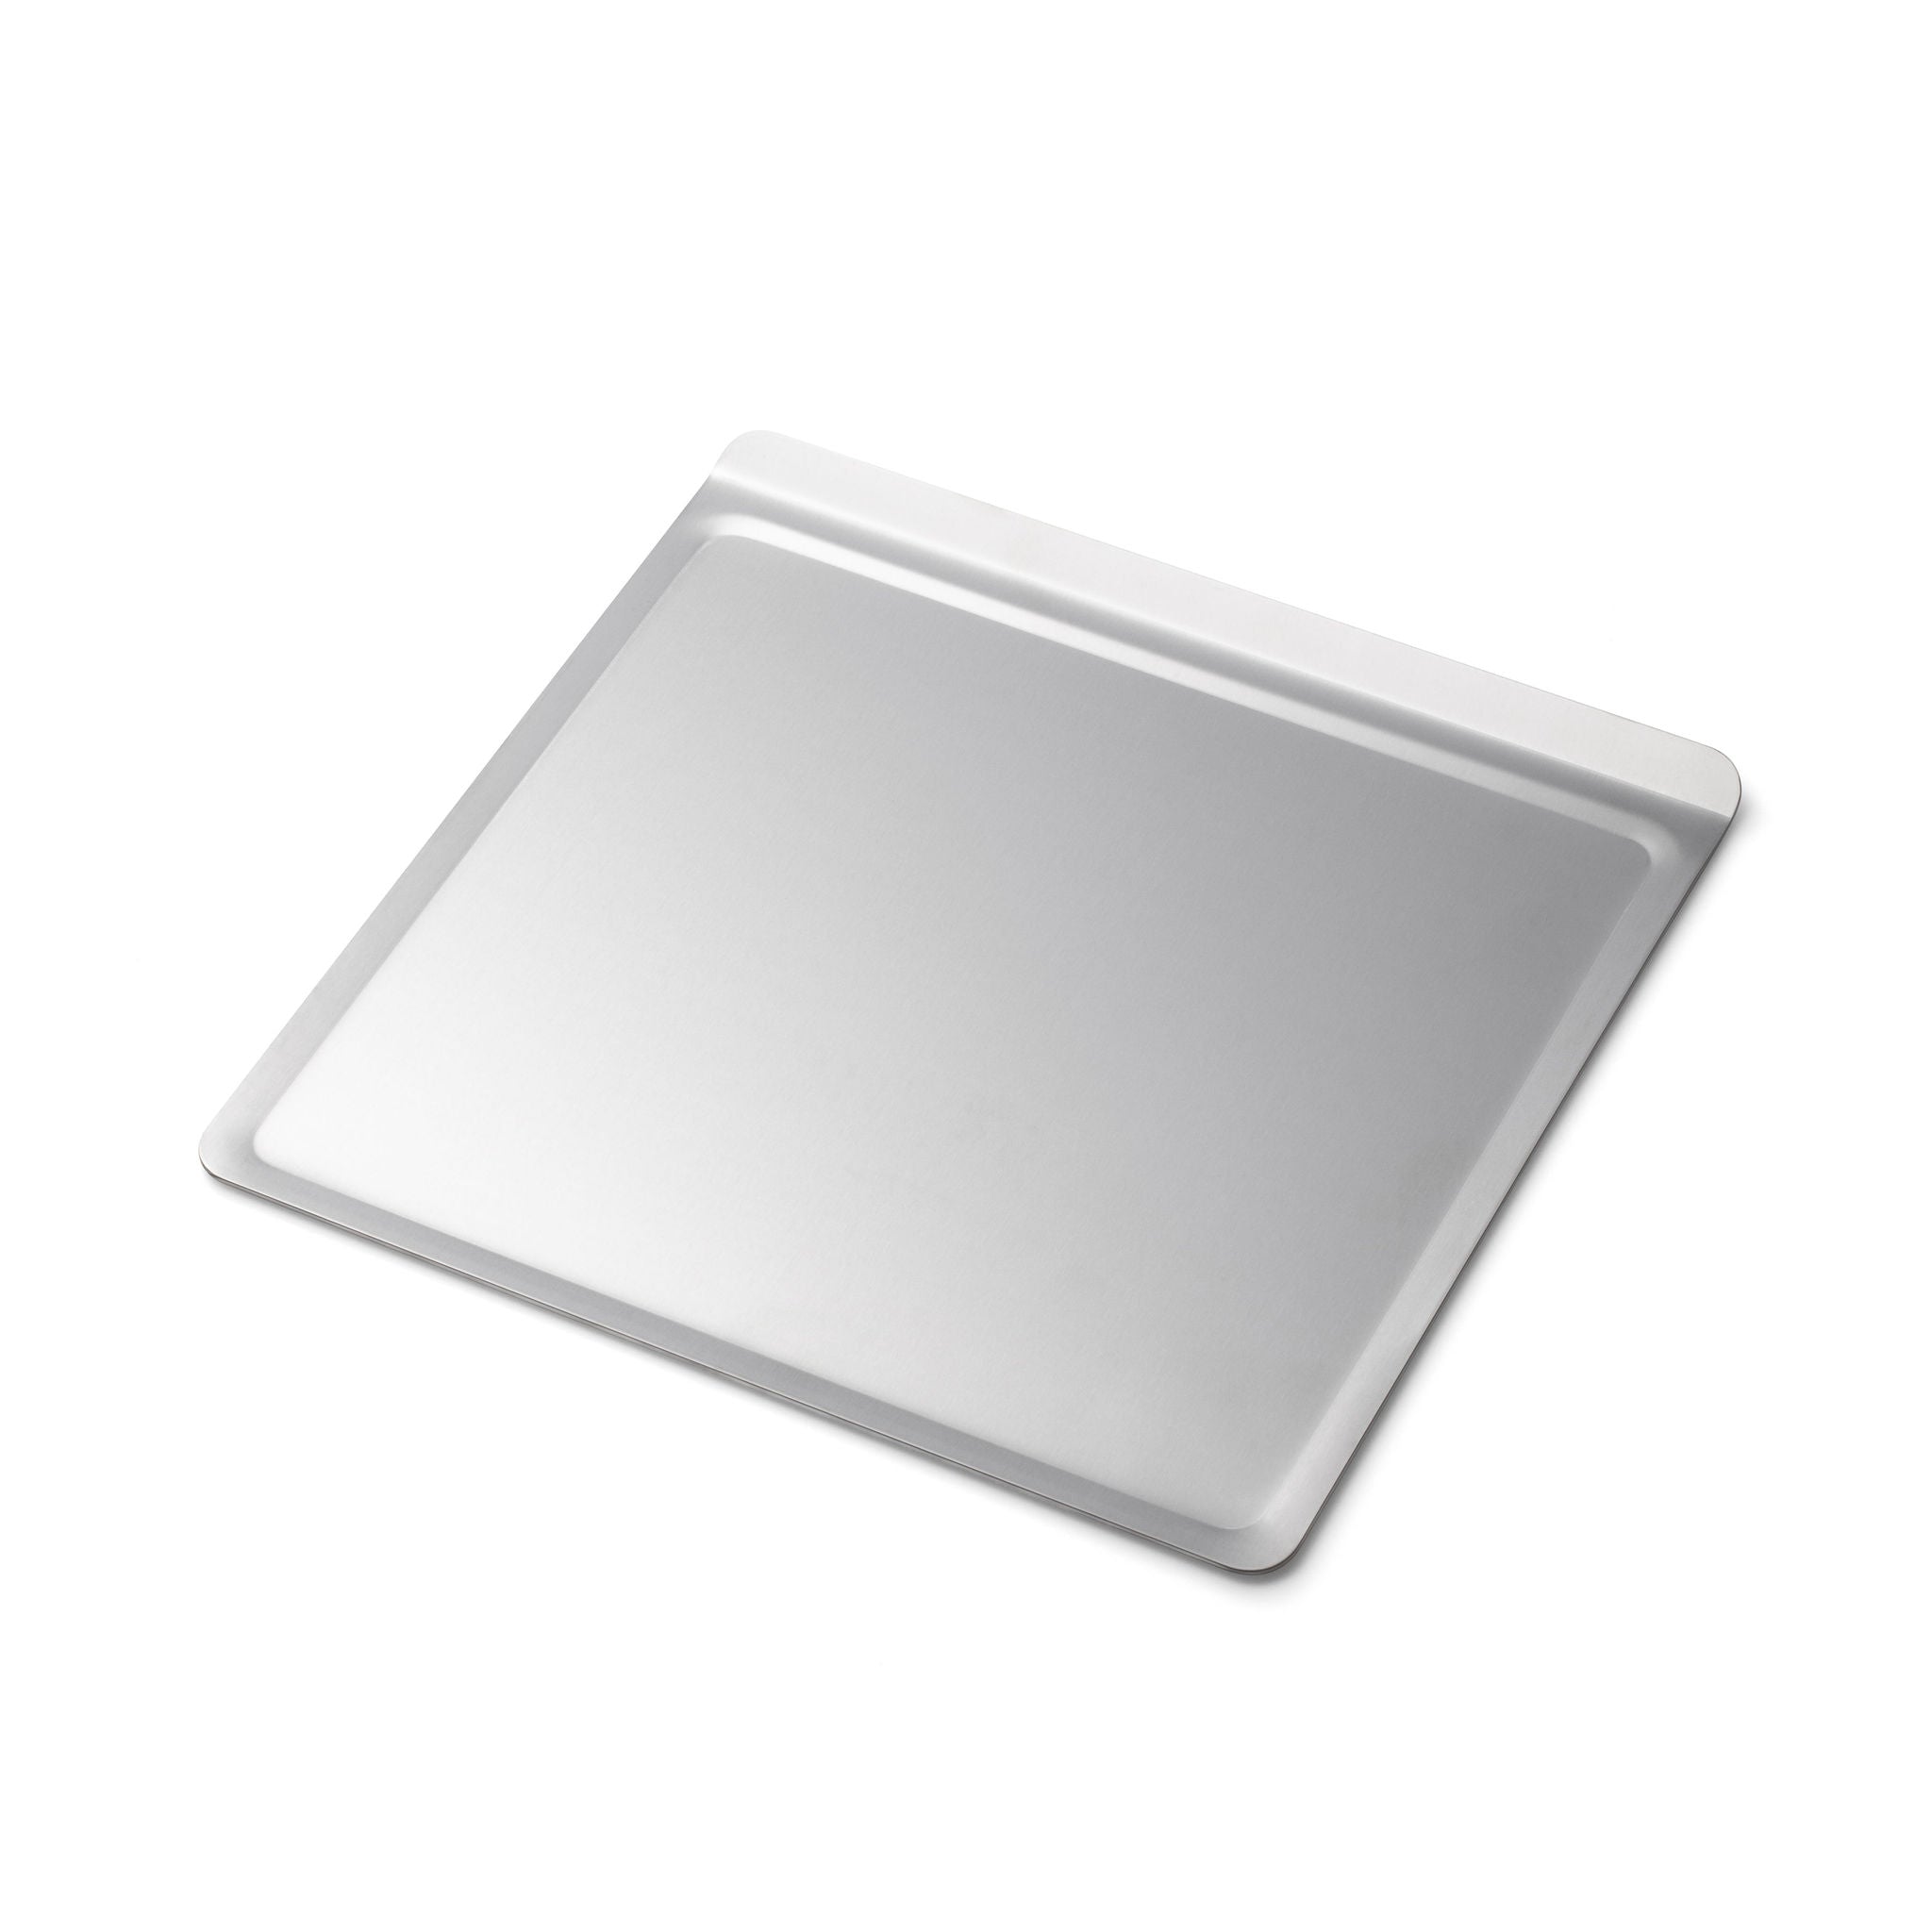 Cookie/Baking Sheet 19x14 Stainless Steel - USA Made